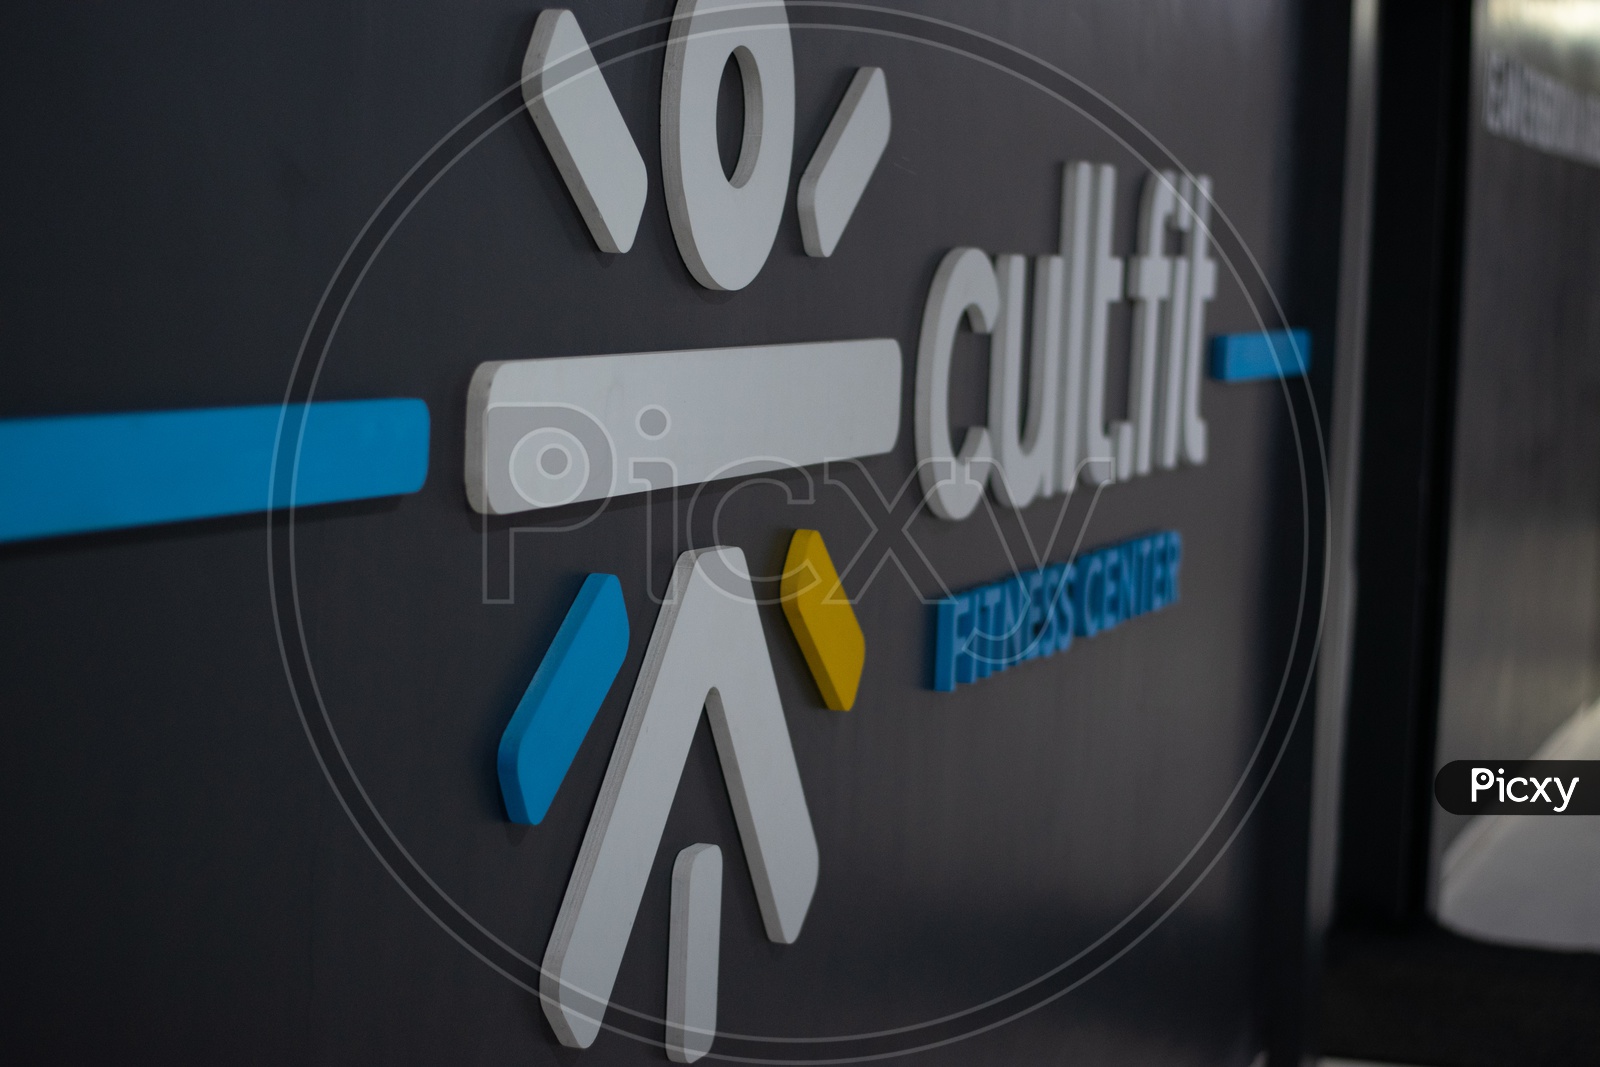 Cult Fit improved its Organic Non Brand clicks by 223%